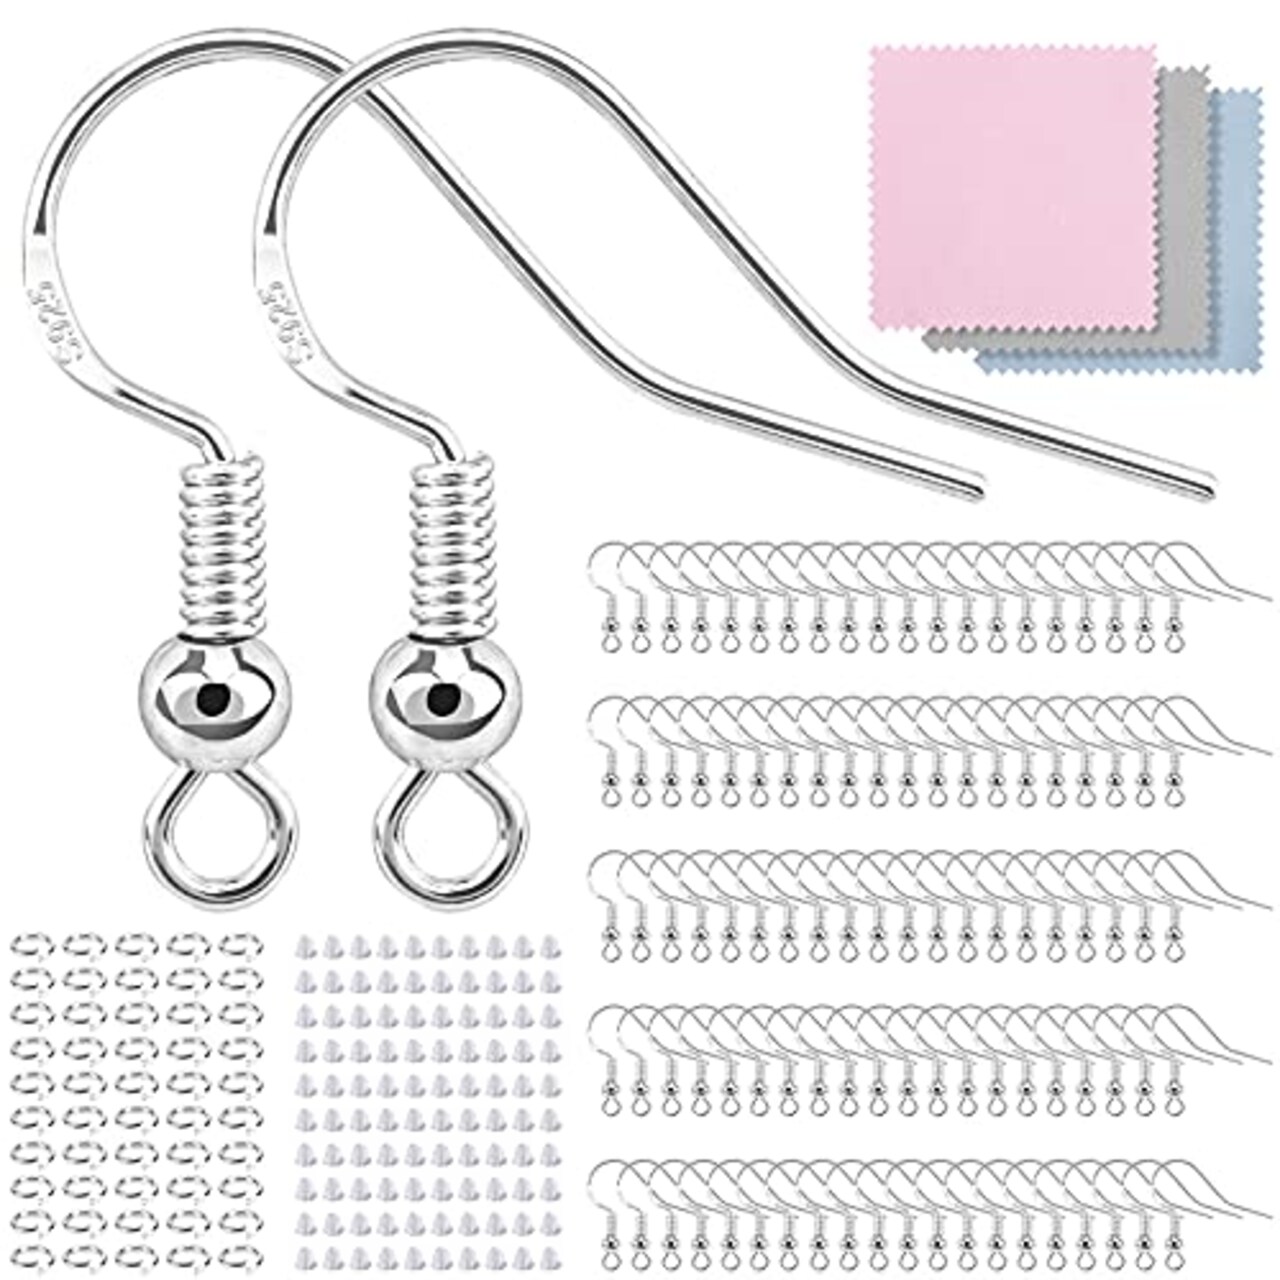 100 PCS Earring Hooks, 925 Sterling Silver Hypoallergenic Earring Hooks for  Jewelry Making, 300 PCS Earring Making kit, Earring Making Supplies with Earring  Backs and Jump Rings